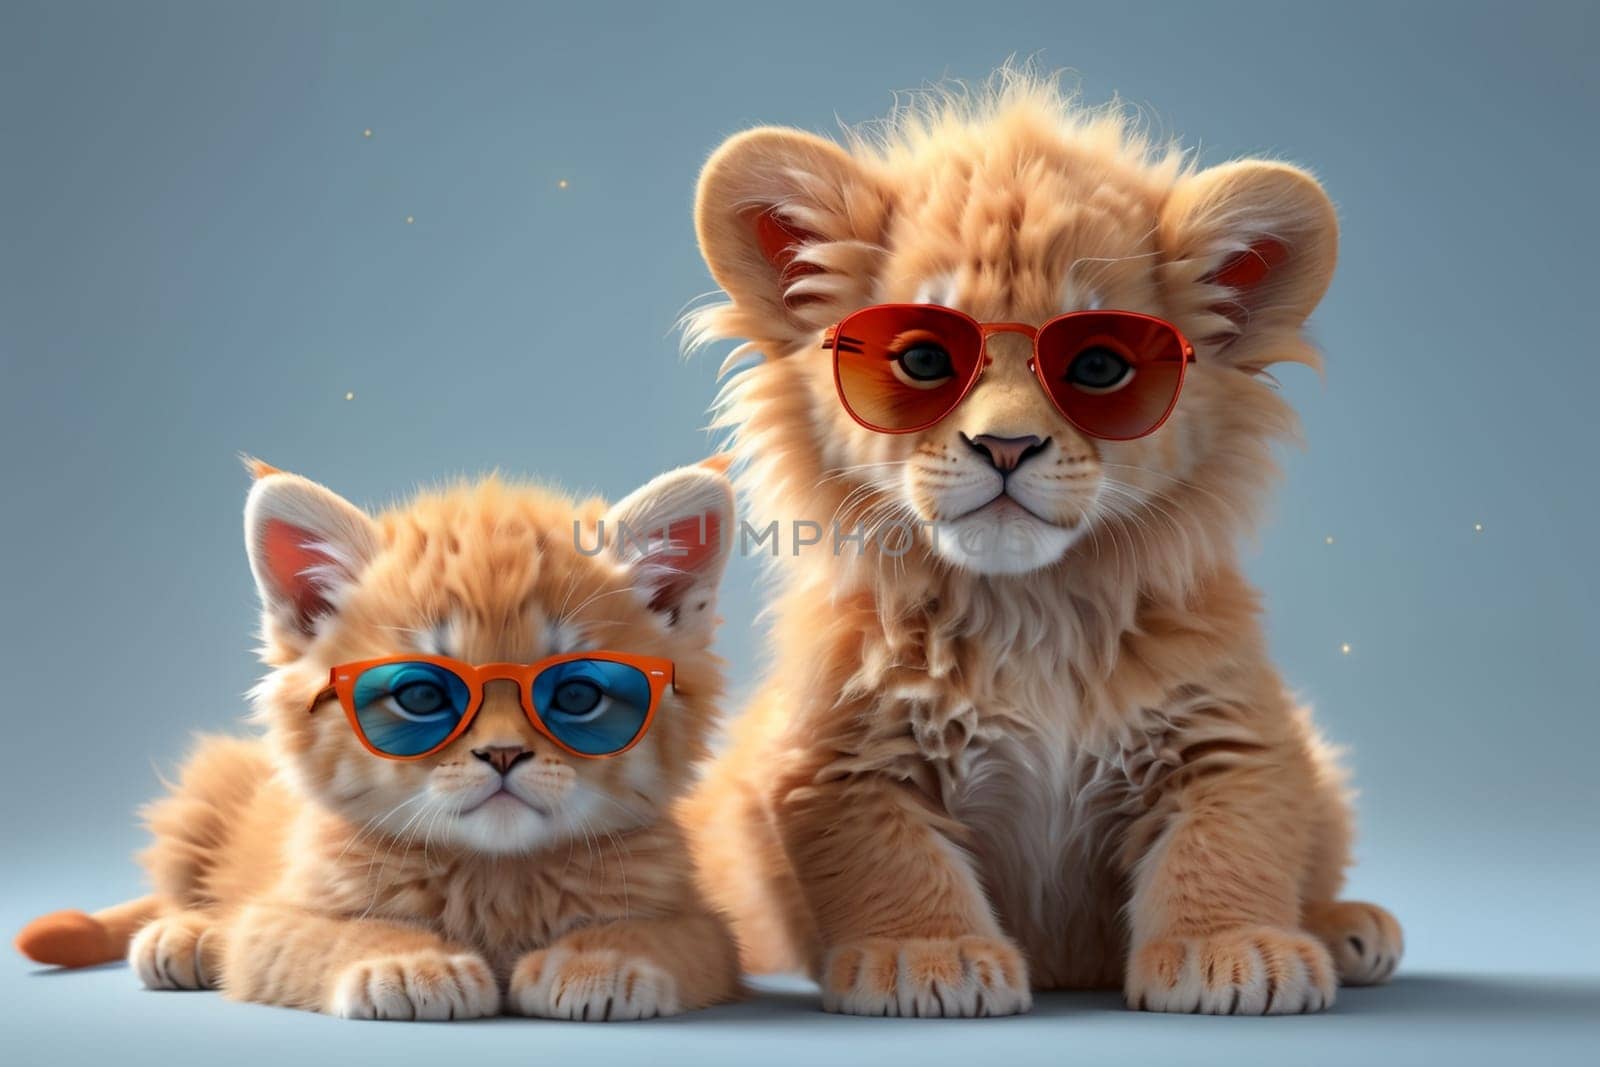 cute red tiger cub and kitten, isolated on a blue background by Rawlik